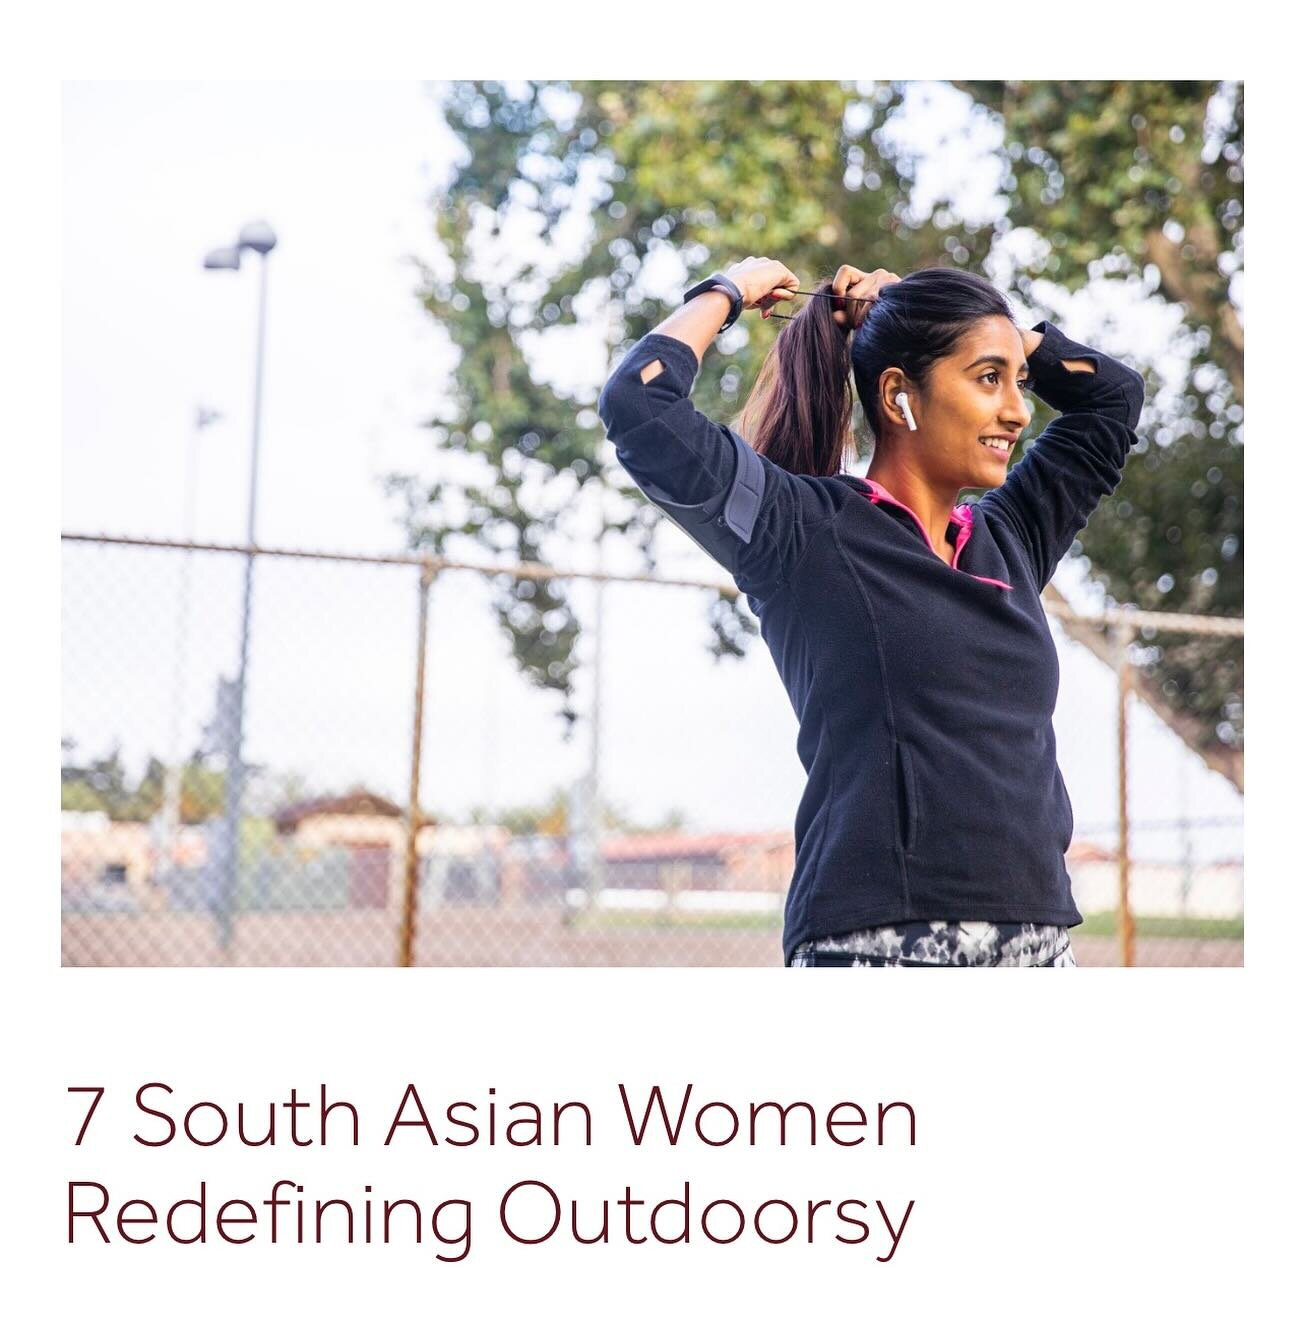 &ldquo;Within the South Asian diaspora, more and more women are redefining what it means to be outdoorsy. They are breaking records, challenging stereotypes, and writing their own narratives &mdash; all while centering community and gender equity.&rd